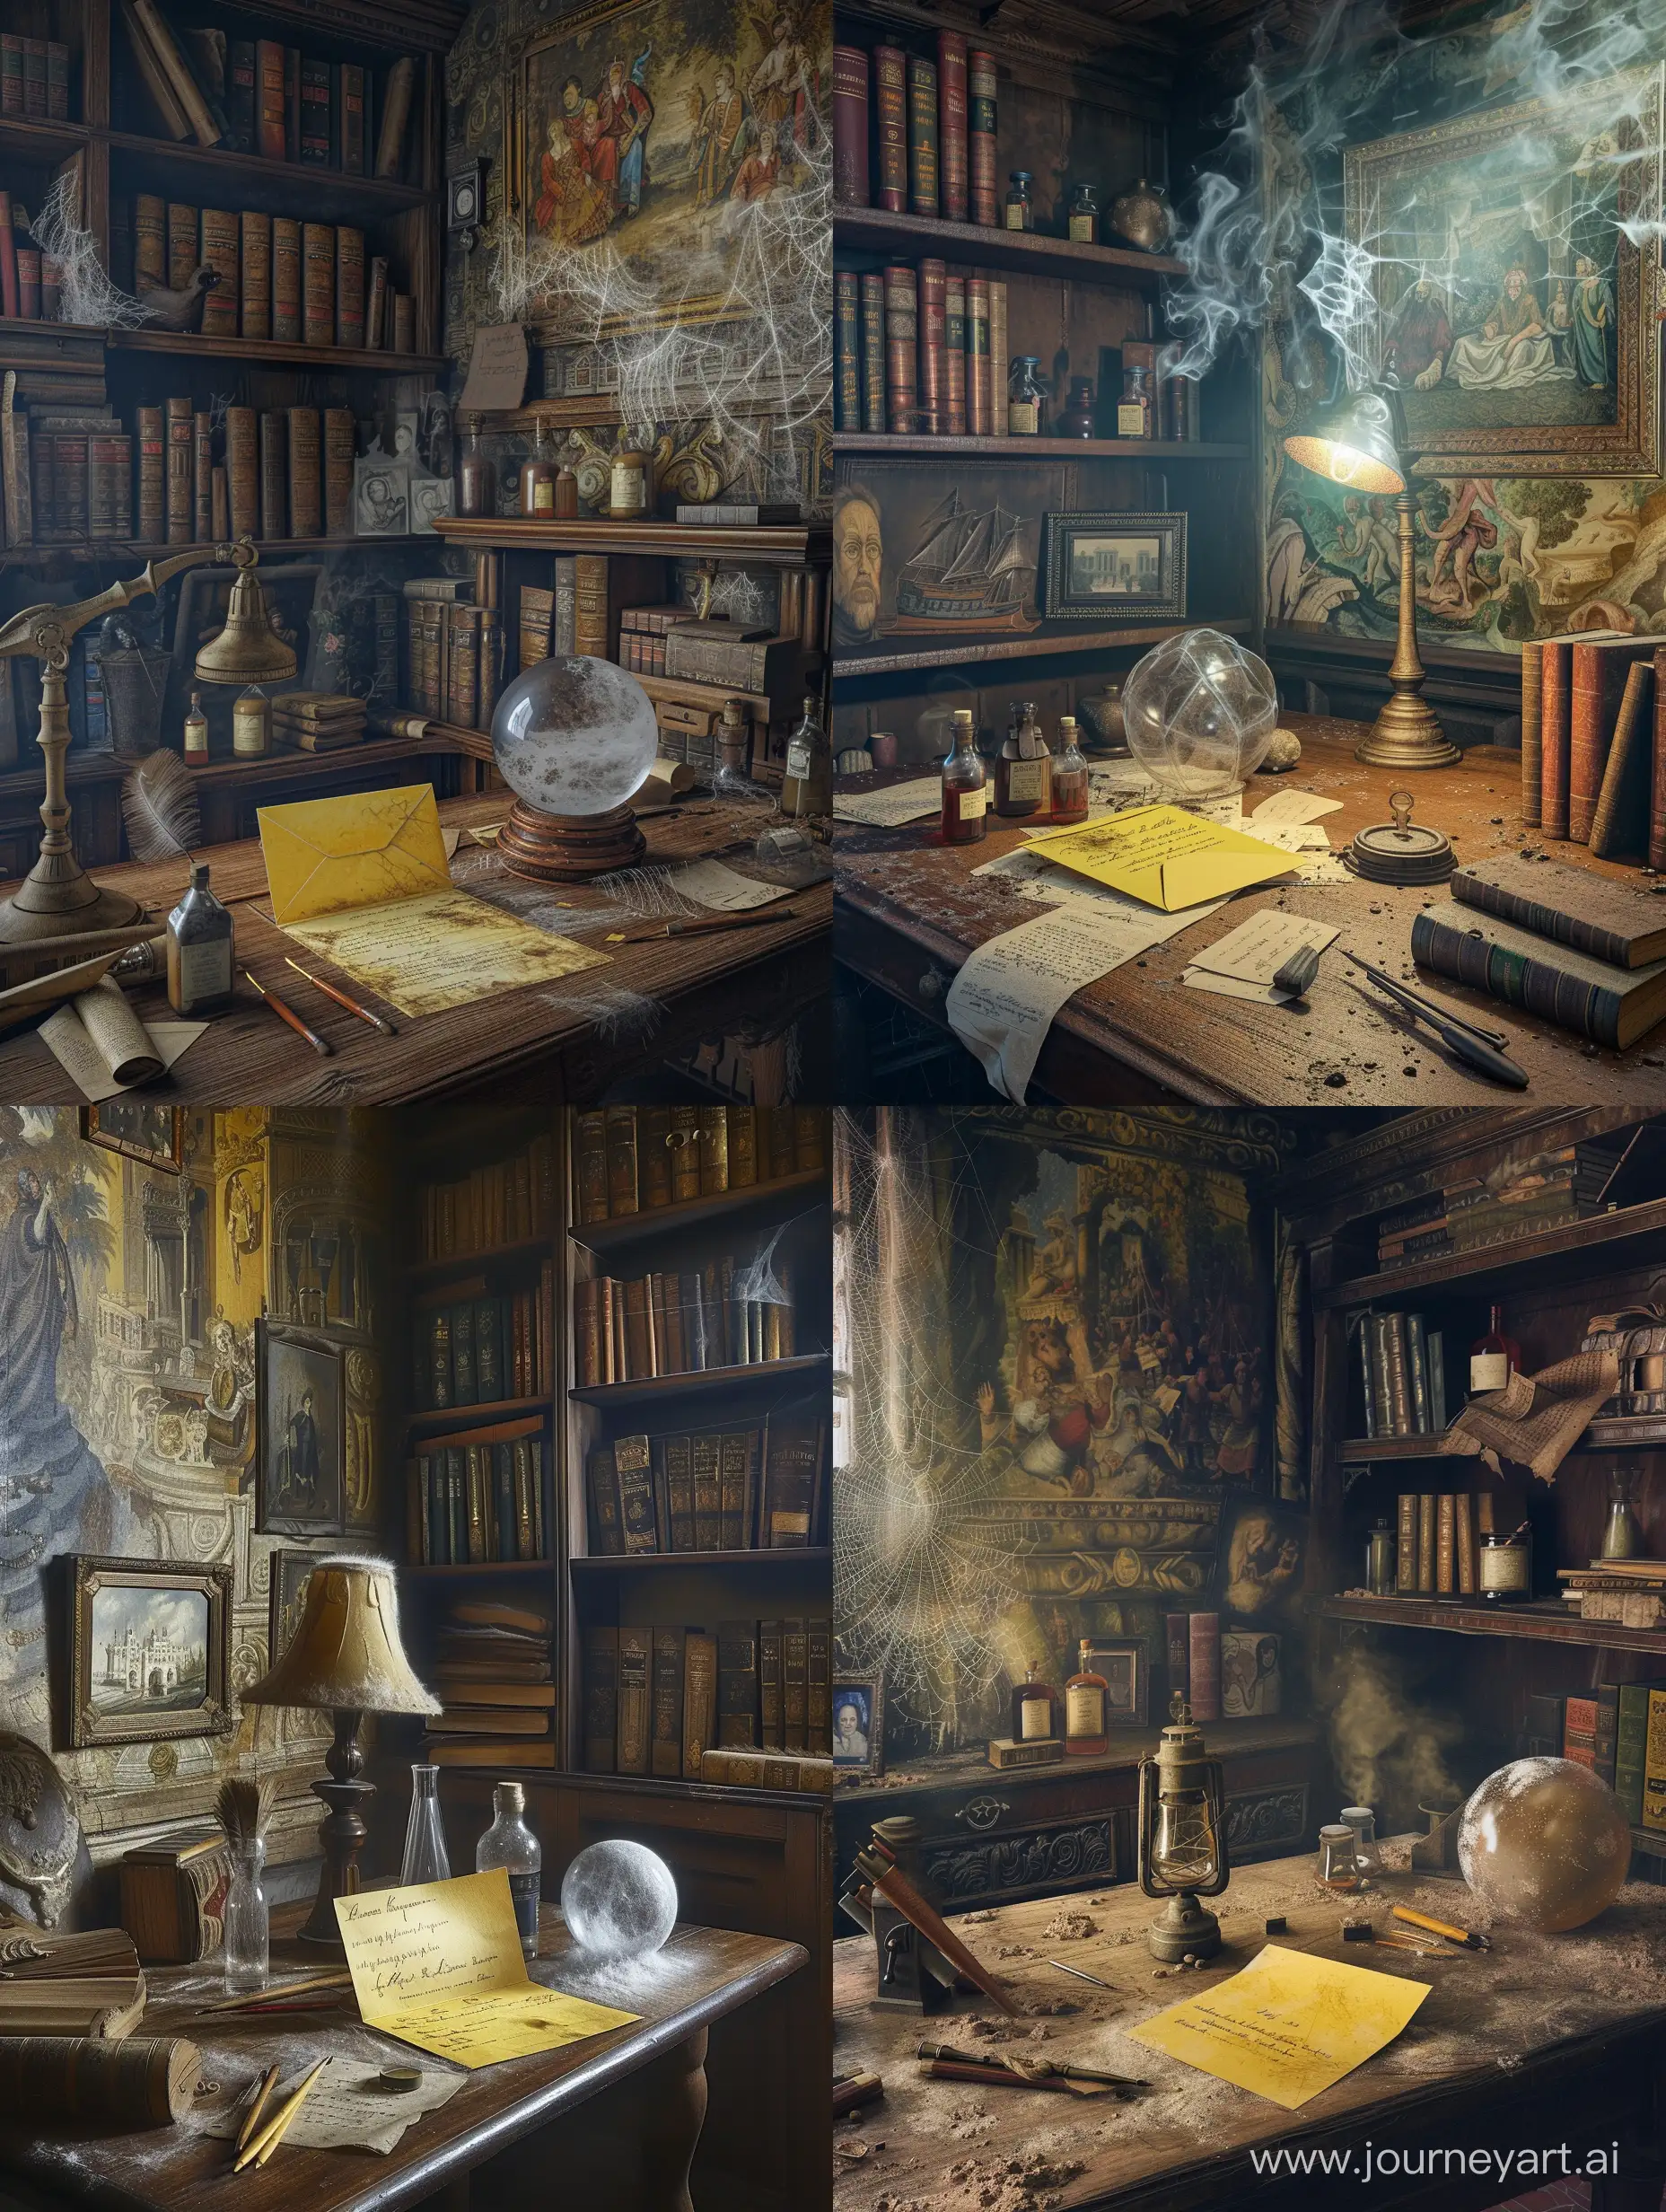 The walls of the study are adorned with faded murals and family portraits, and the dusty bookshelves are stacked with various ancient books, their spines covered in cobwebs. In the center of the room stands an antique wooden desk scattered with quill pens, ink bottles, and some yellowed parchment. An old oil lamp emits a faint glow, illuminating the yellowed, already opened letter on the desk. Next to the letter, a dust-filled crystal ball reflects every corner of the room.